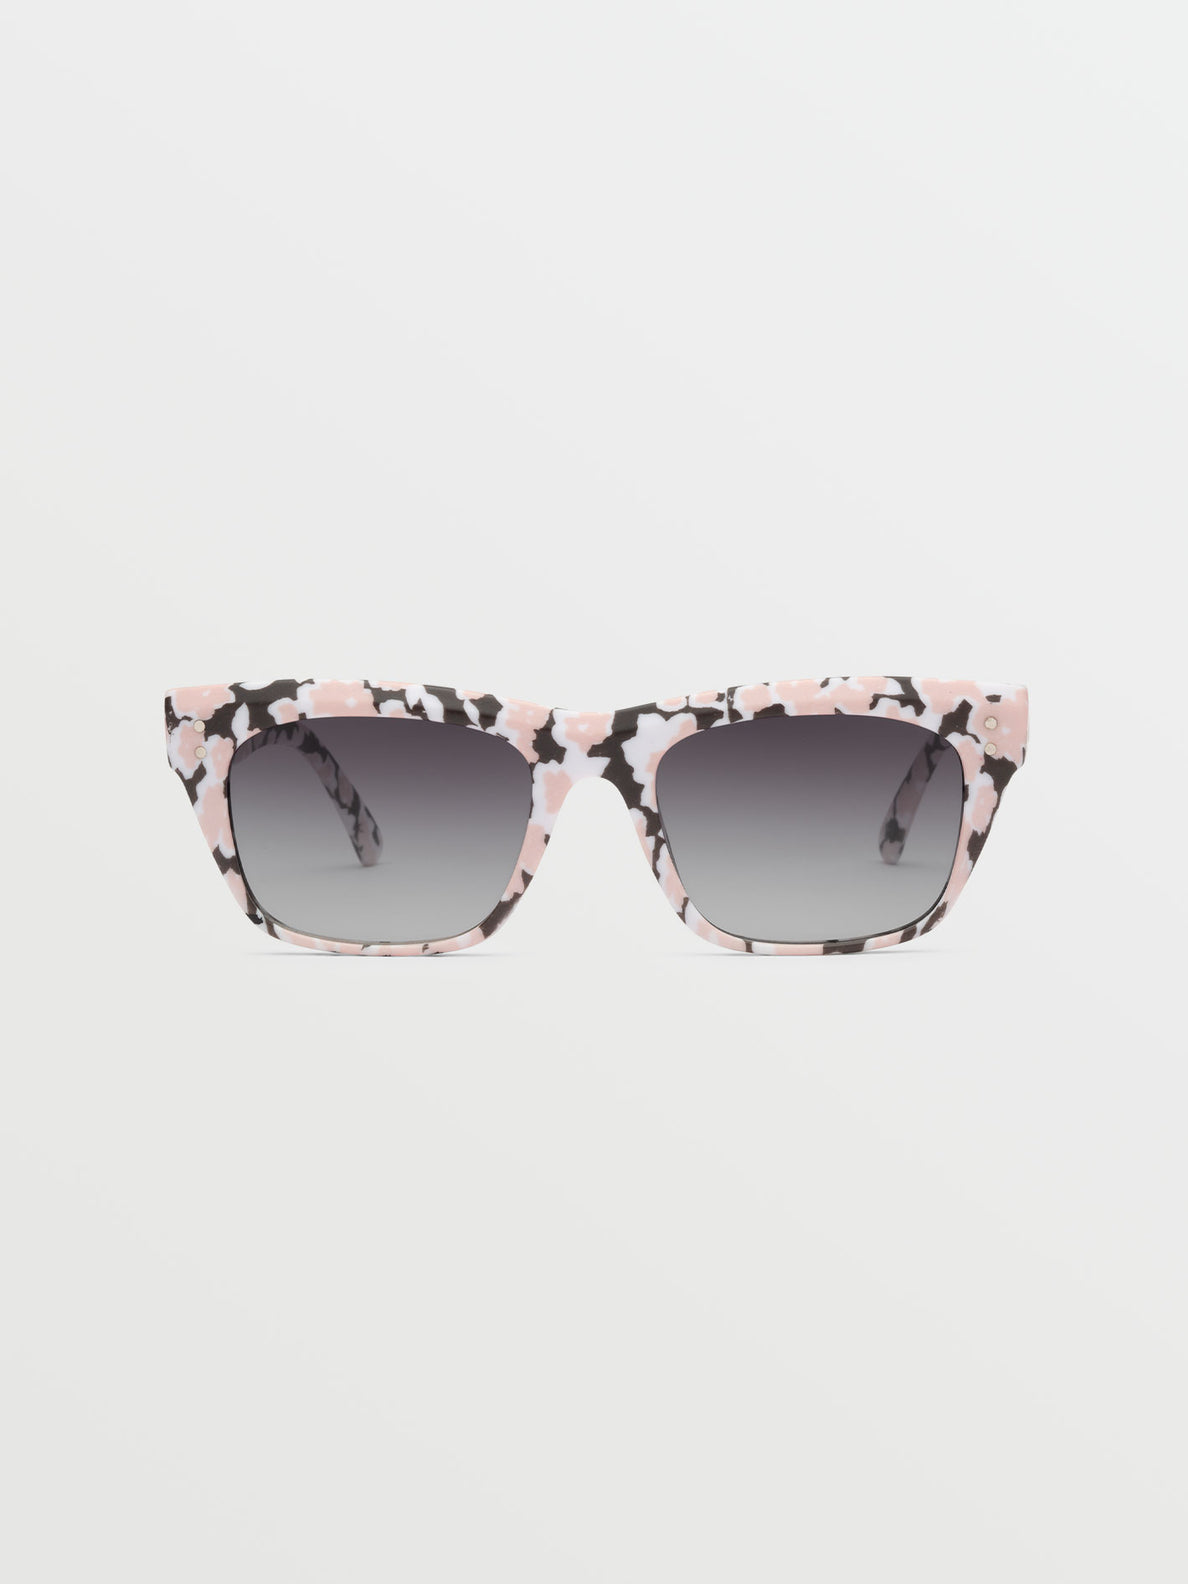 Stoneview Sunglasses - What's Poppin/Gray Gradient